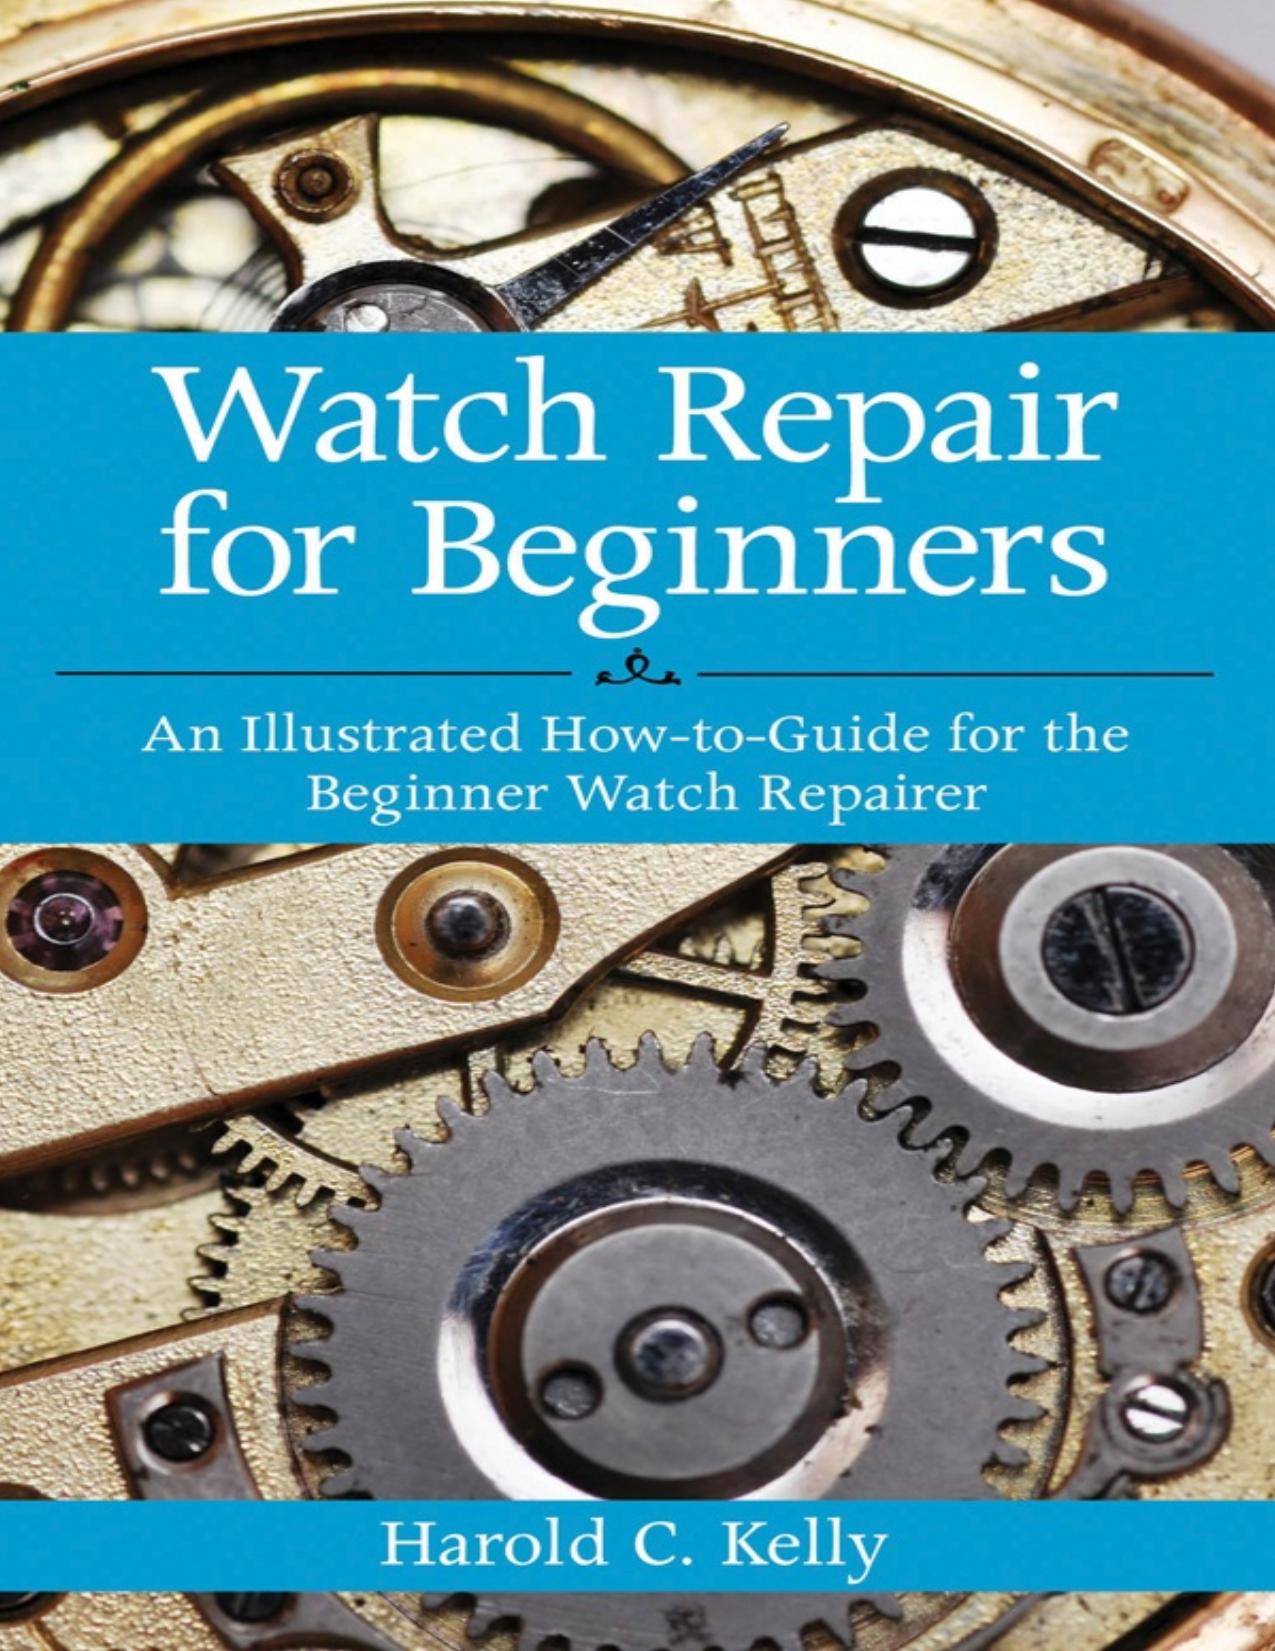 Watch Repair for Beginners: An Illustrated How-To Guide for the Beginner Watch Repairer - PDFDrive.com